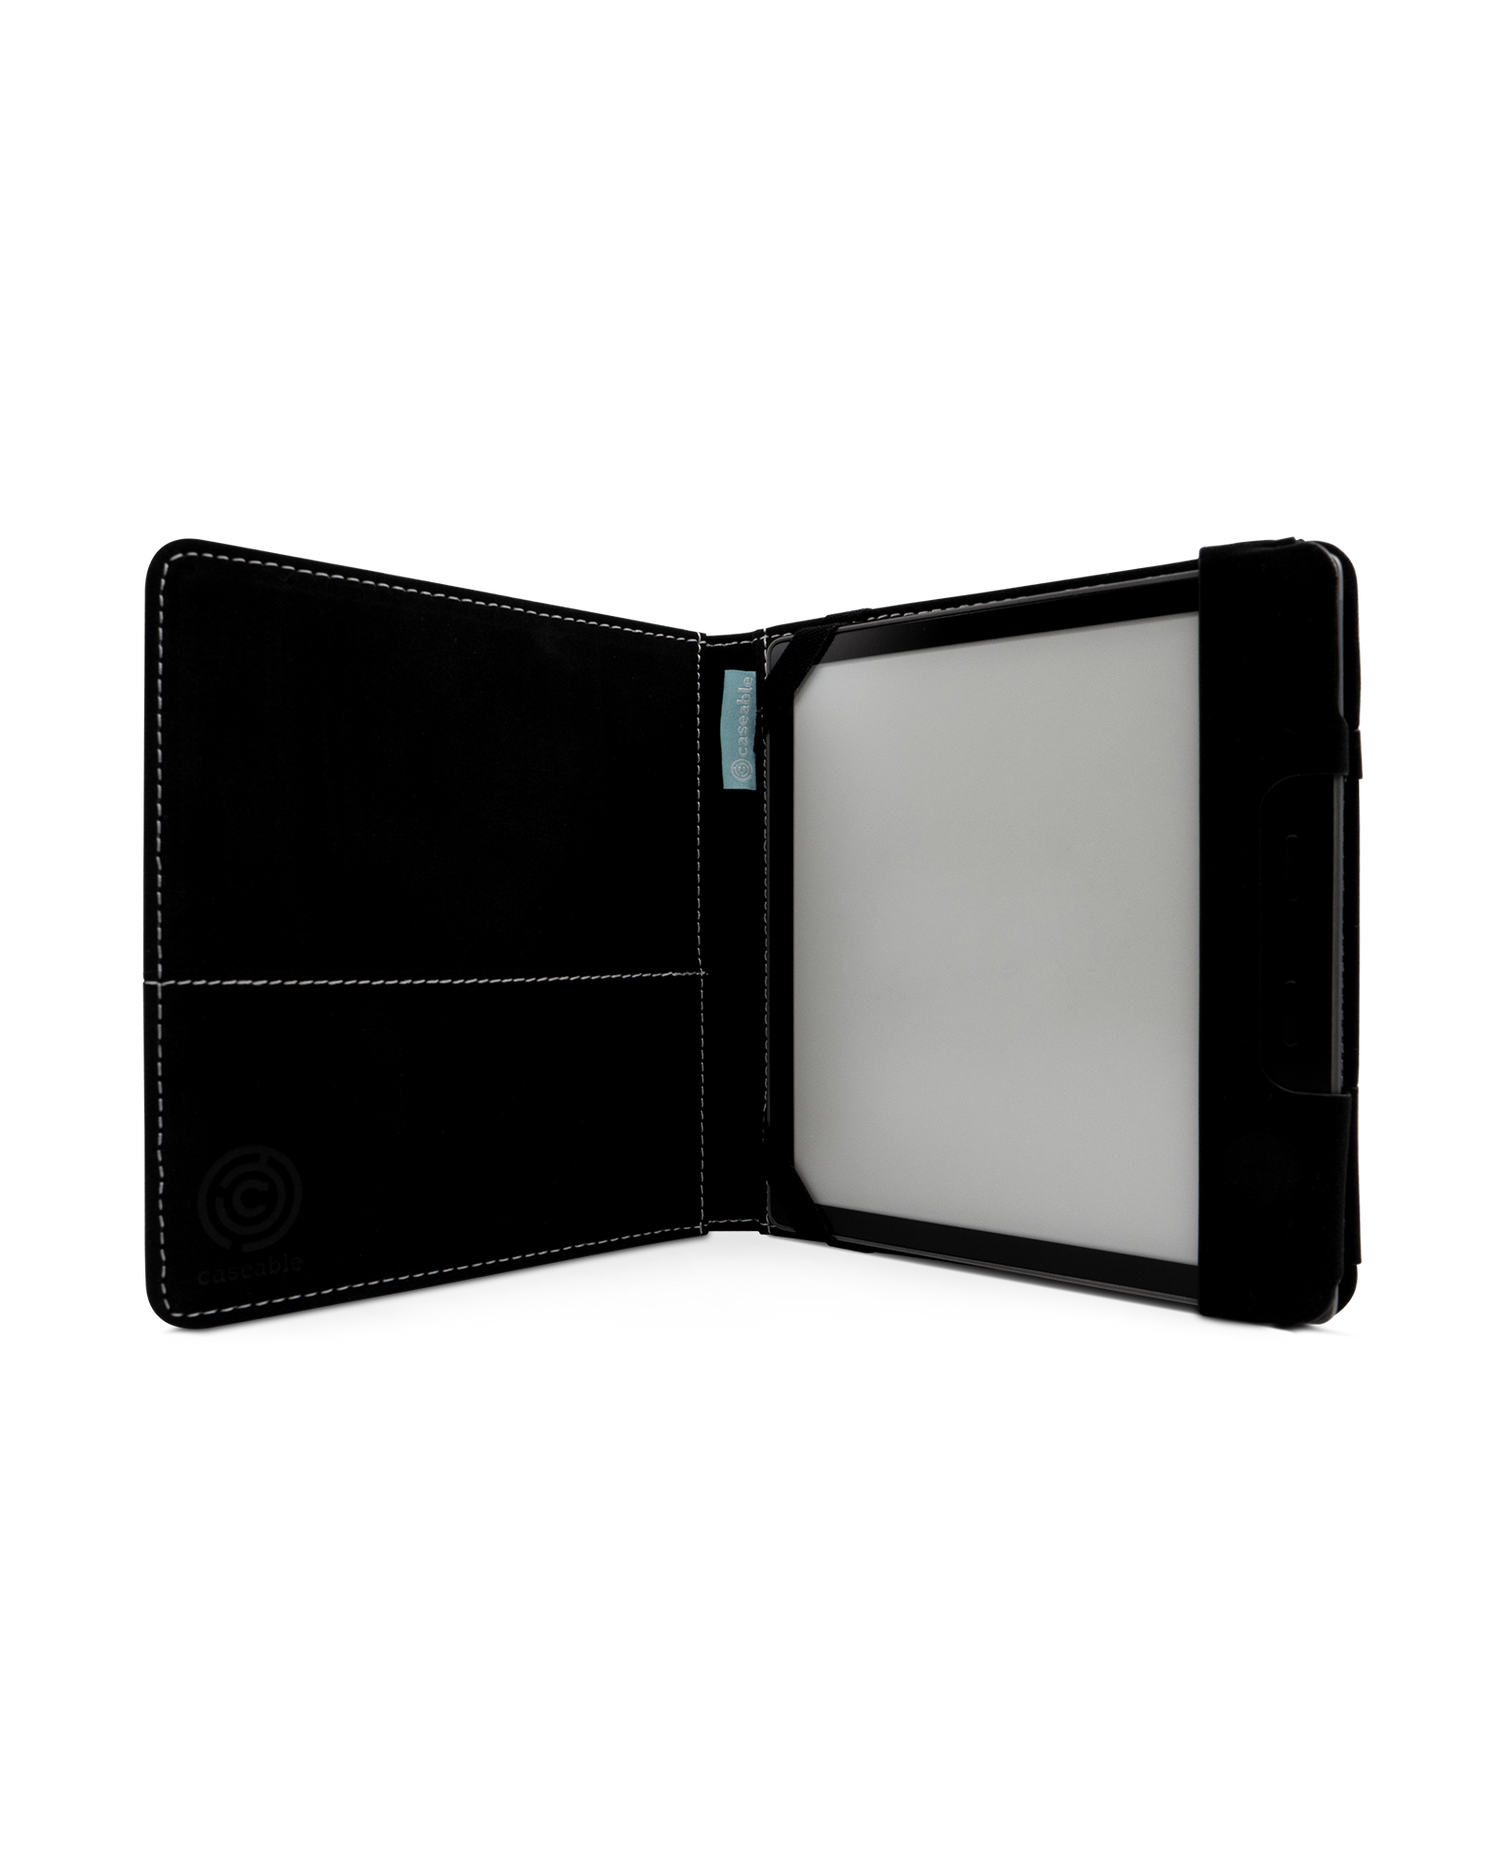 Psychedelic Optics eReader Case for tolino vision 6: Opened interior view